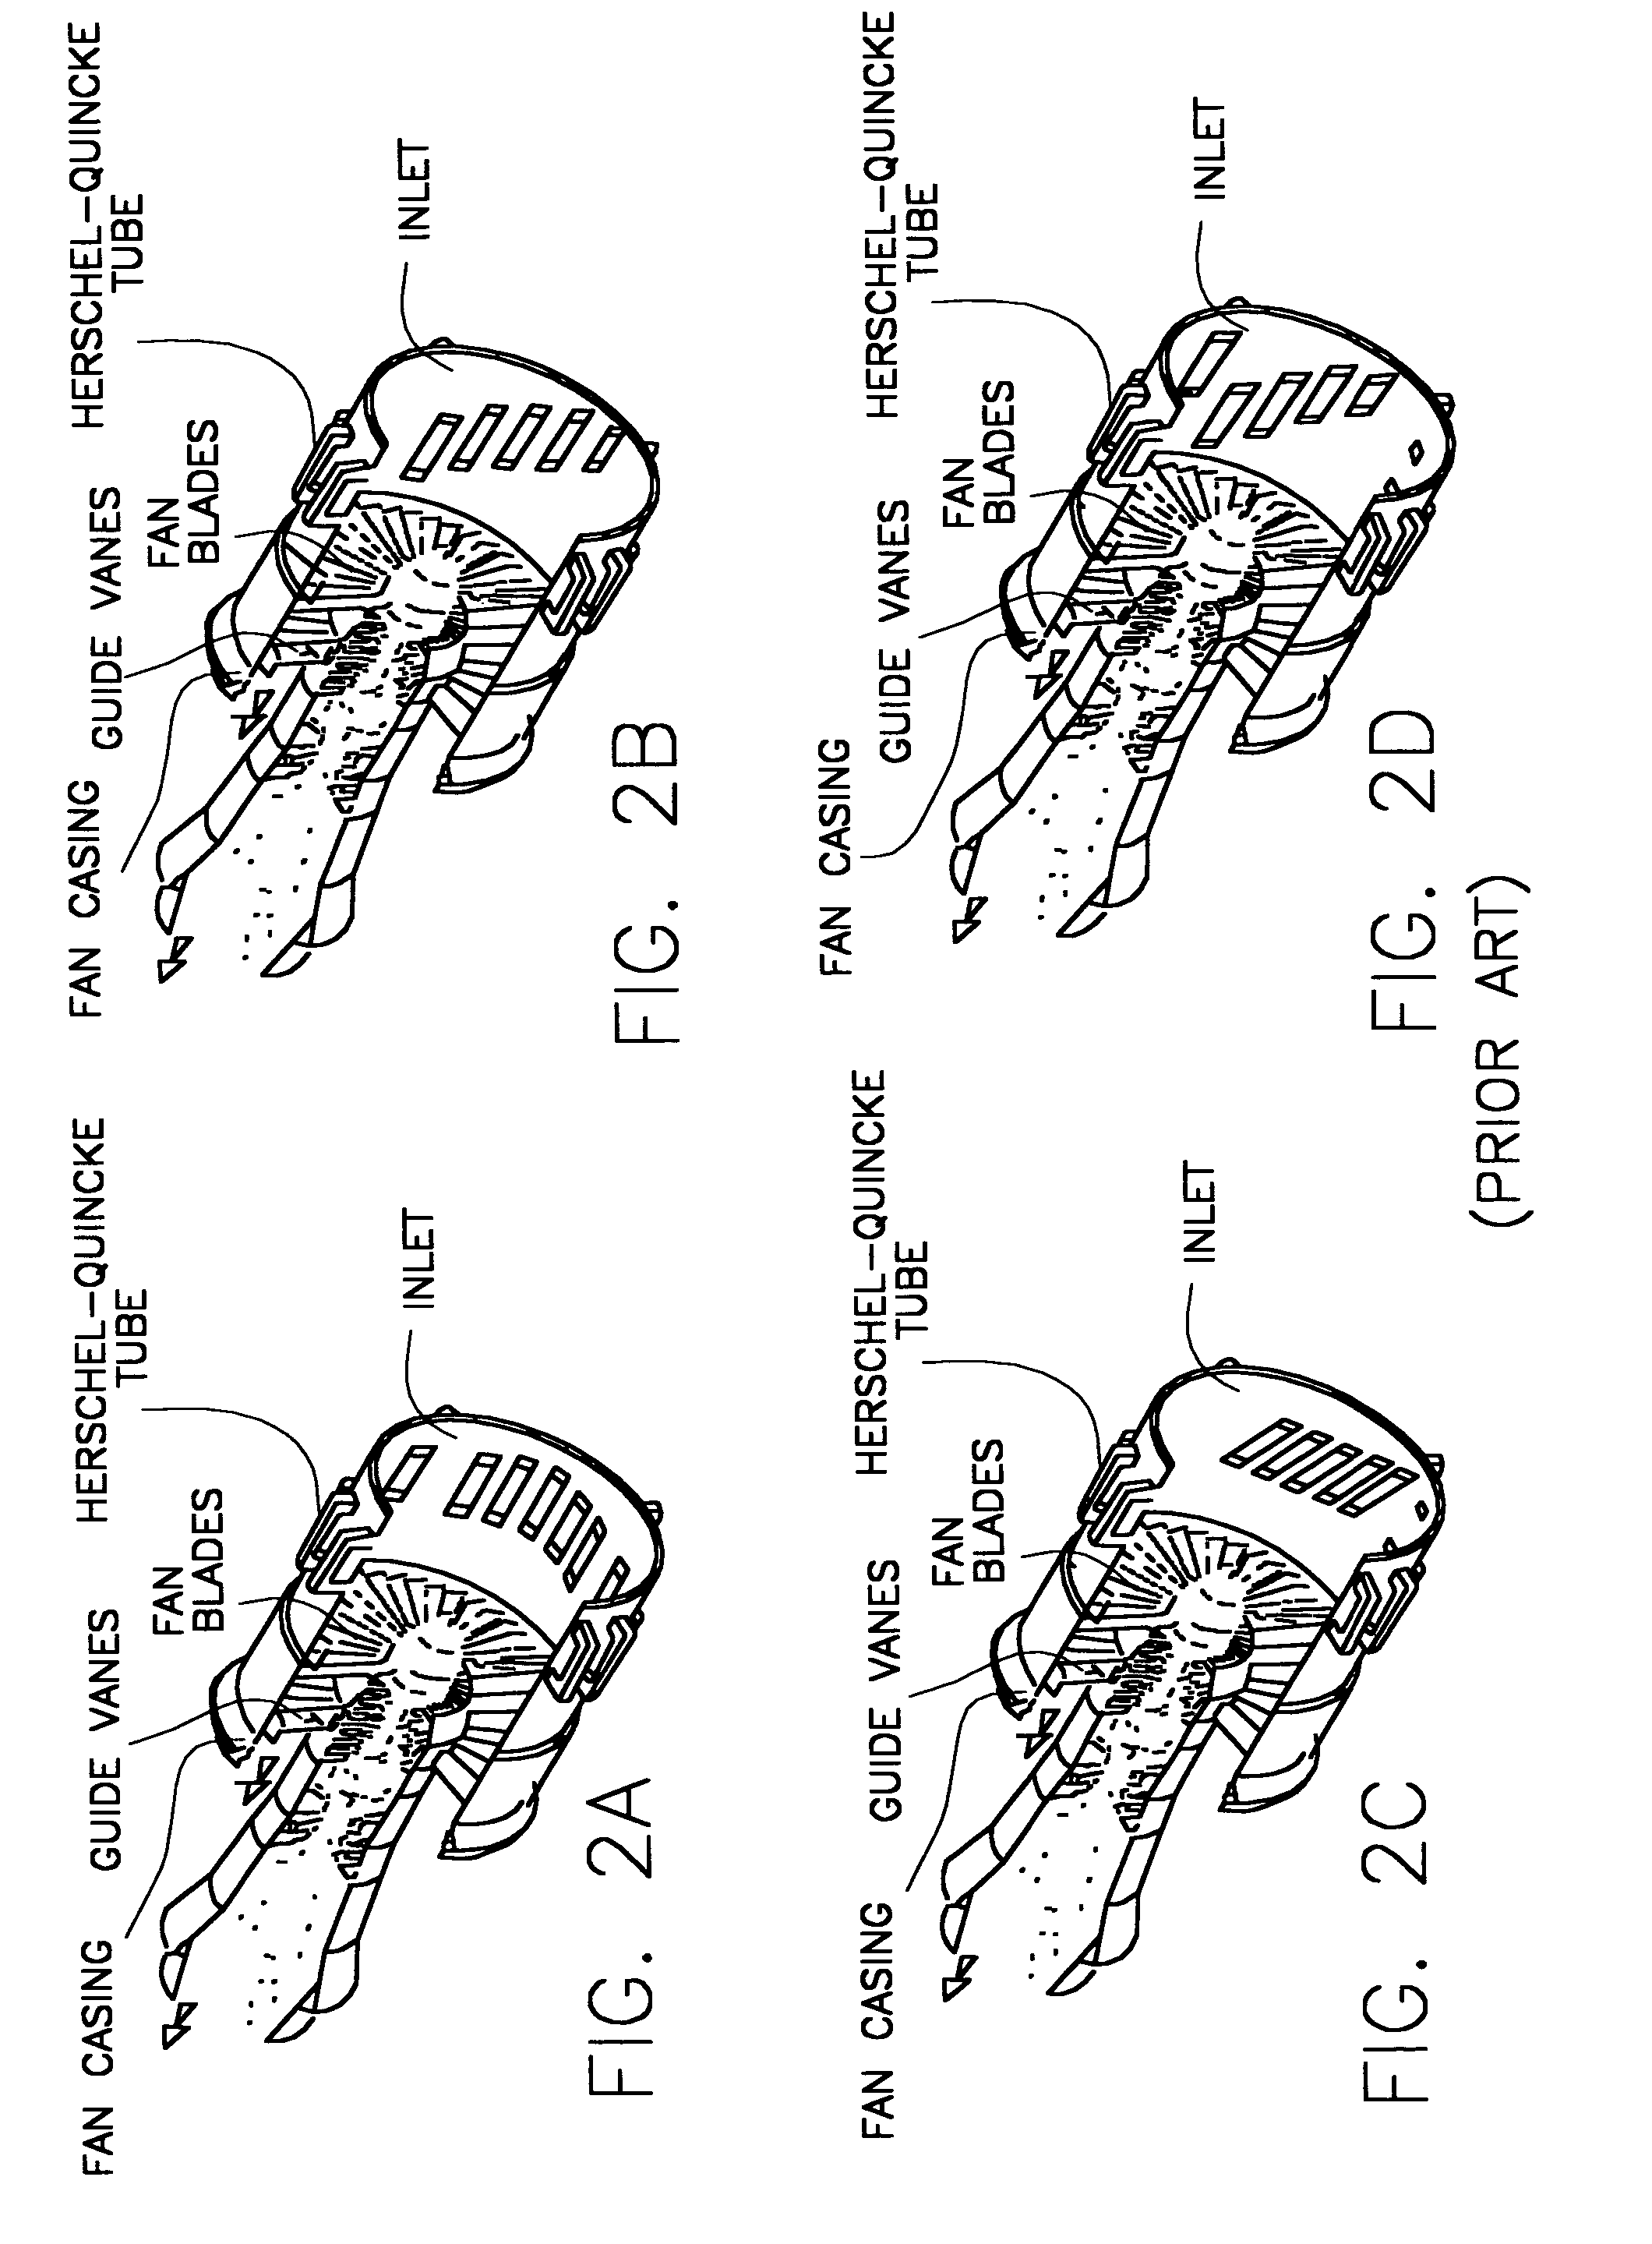 Assembly and method for aircraft engine noise reduction